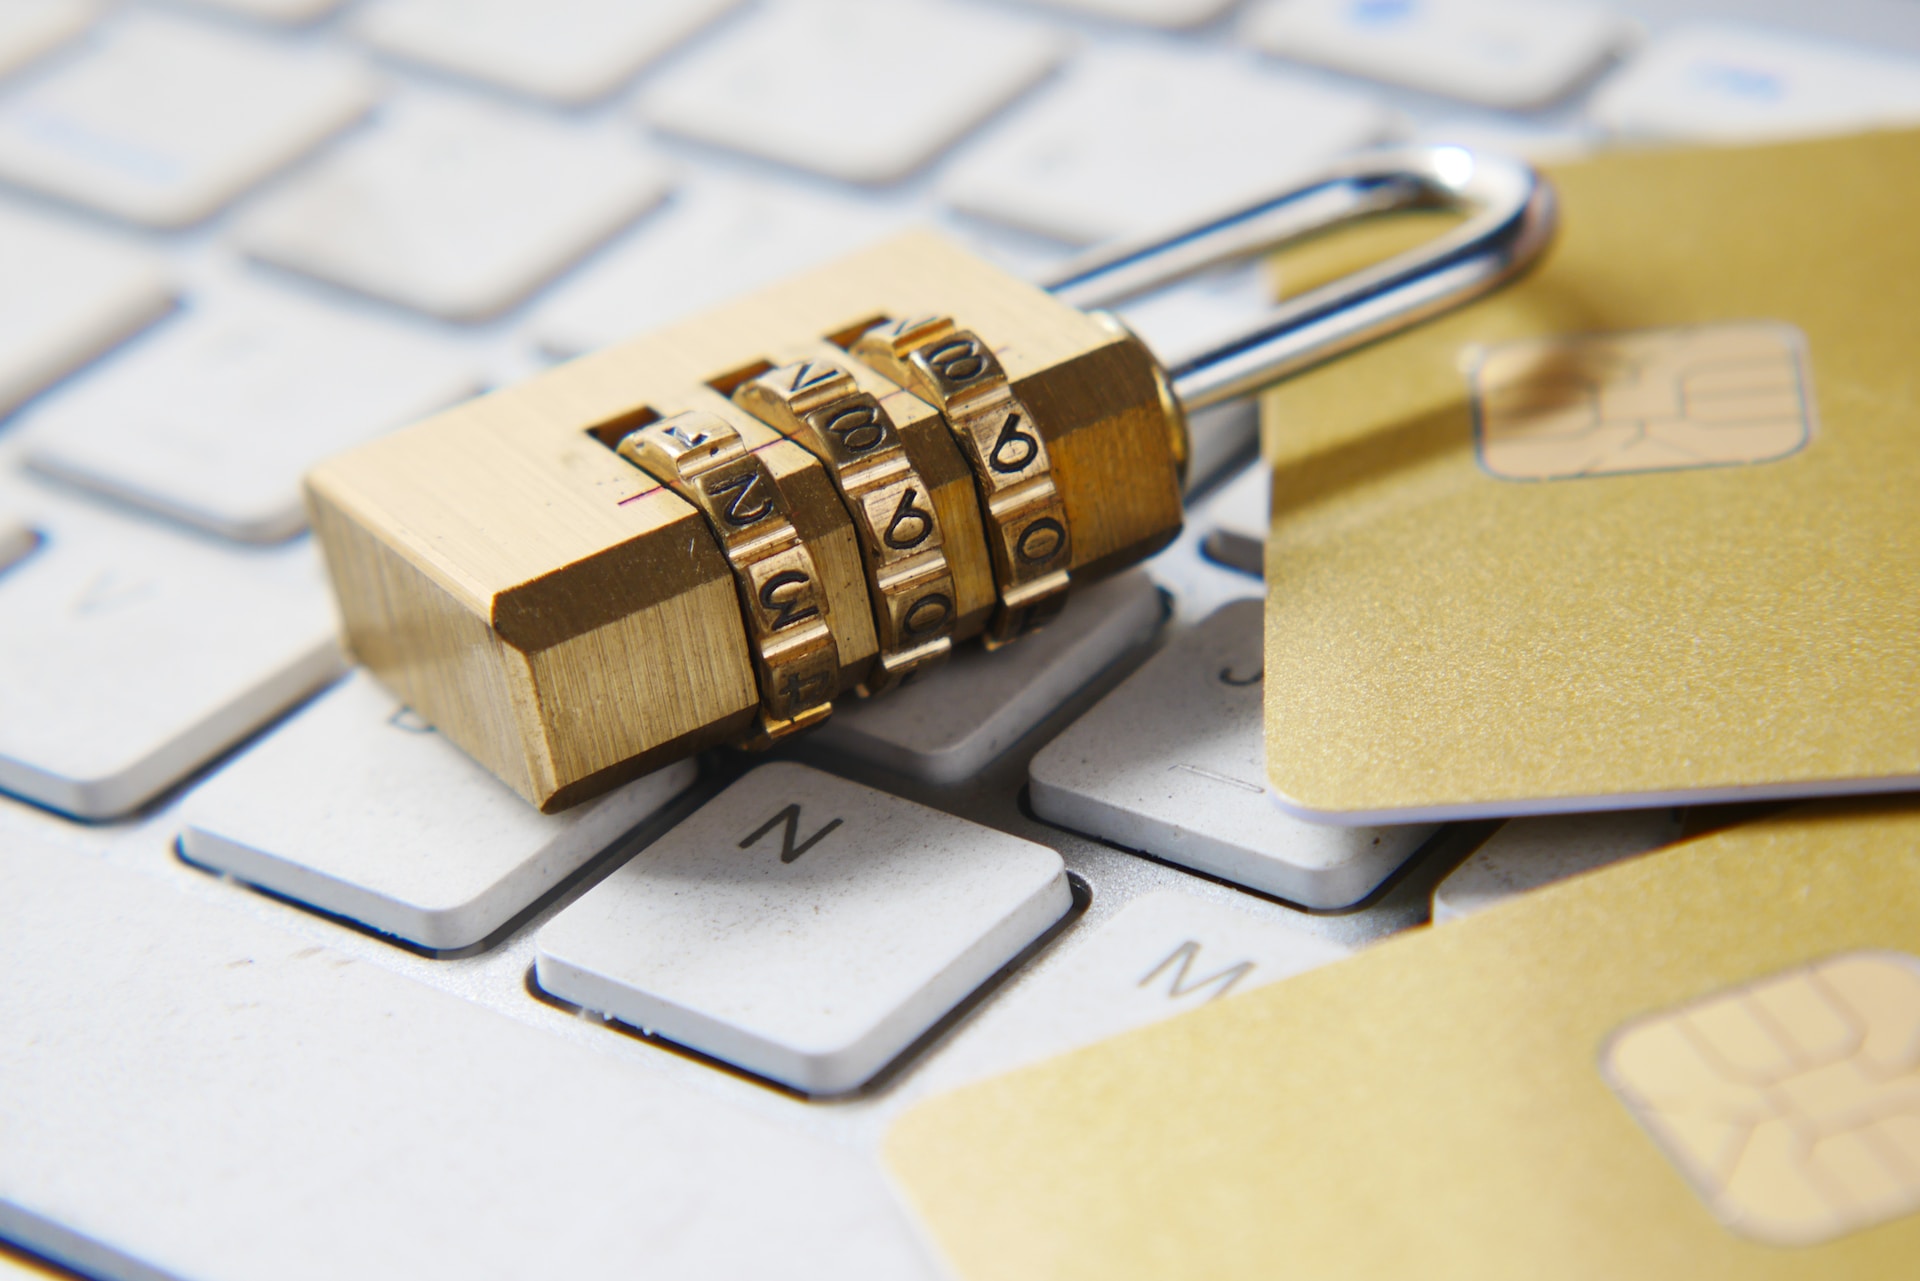 A gold padlock on a keyboard with credit cards, symbolizing secure intellectual property protection for international markets.